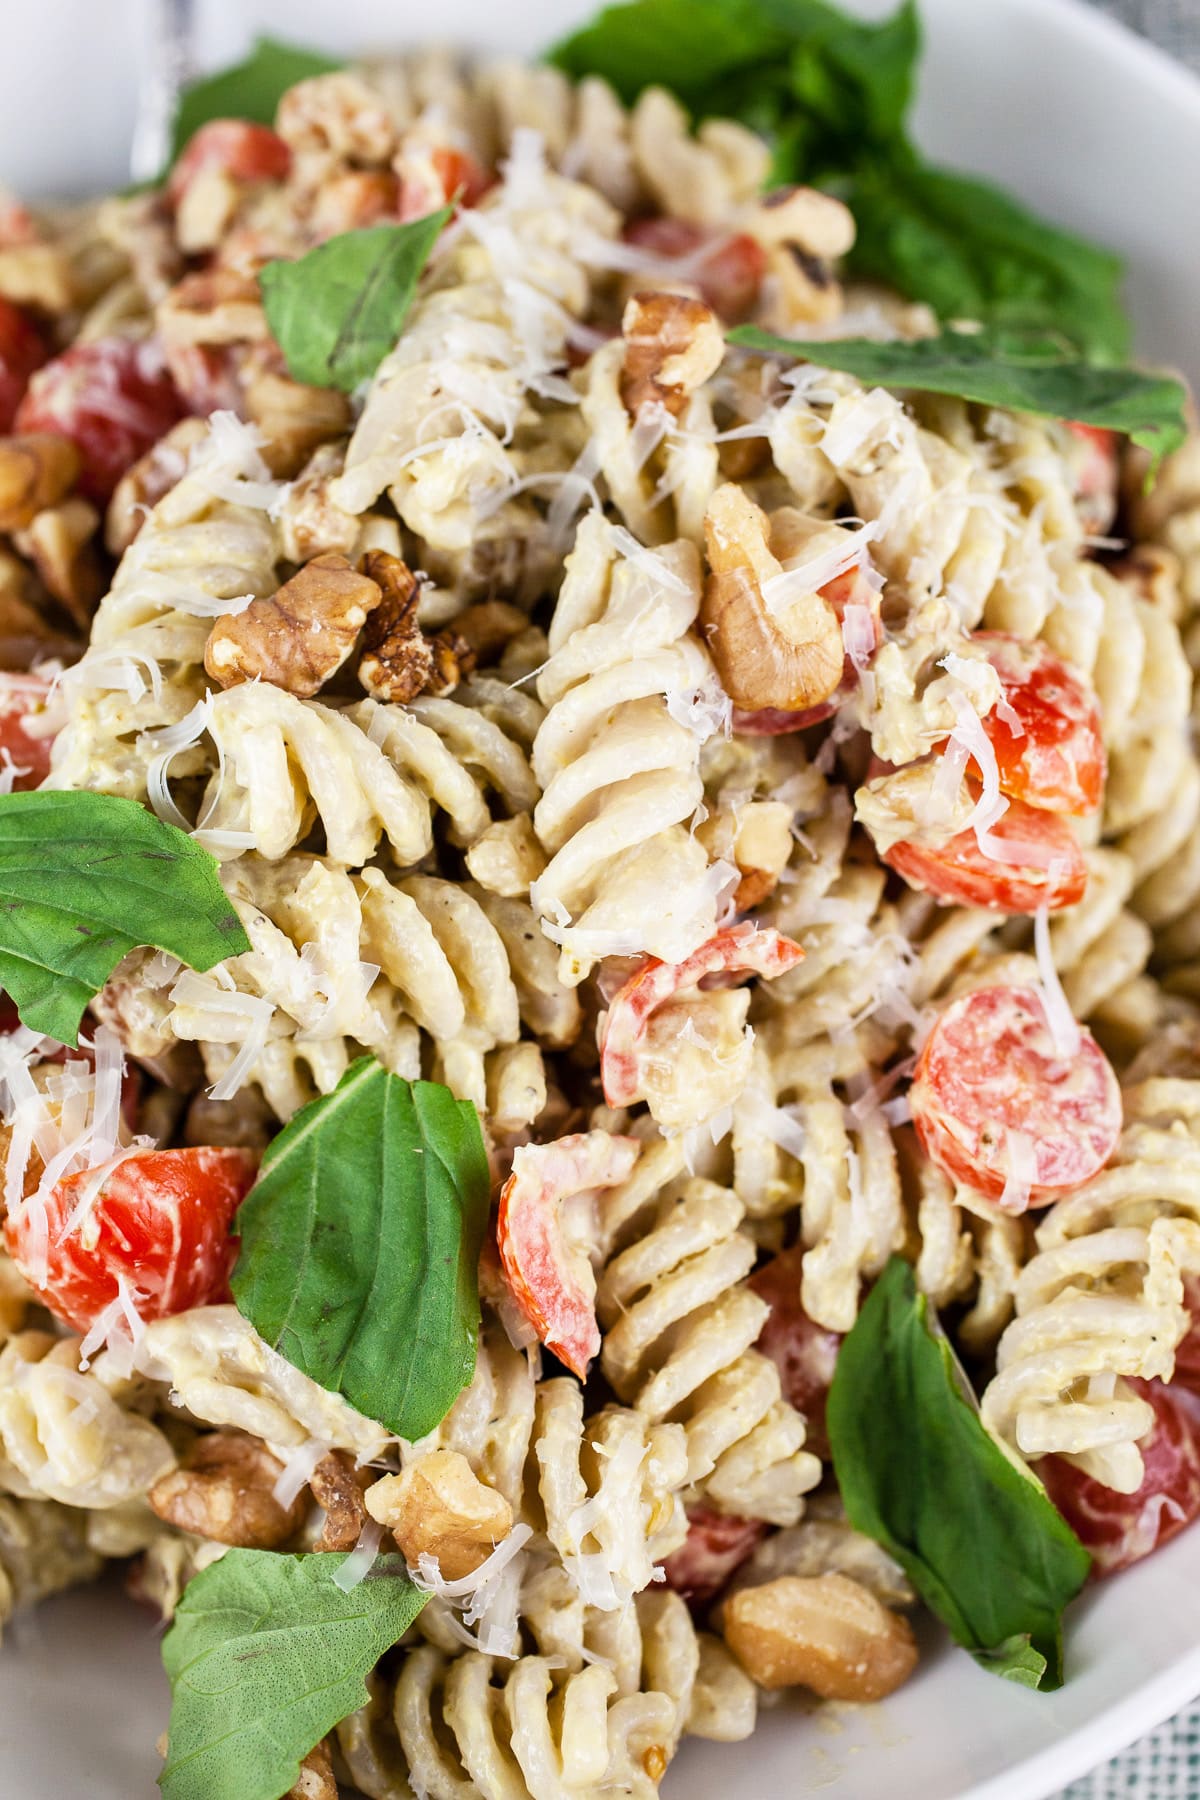 Summer pesto pasta salad with tomatoes, walnuts, and fresh basil in white bowl.